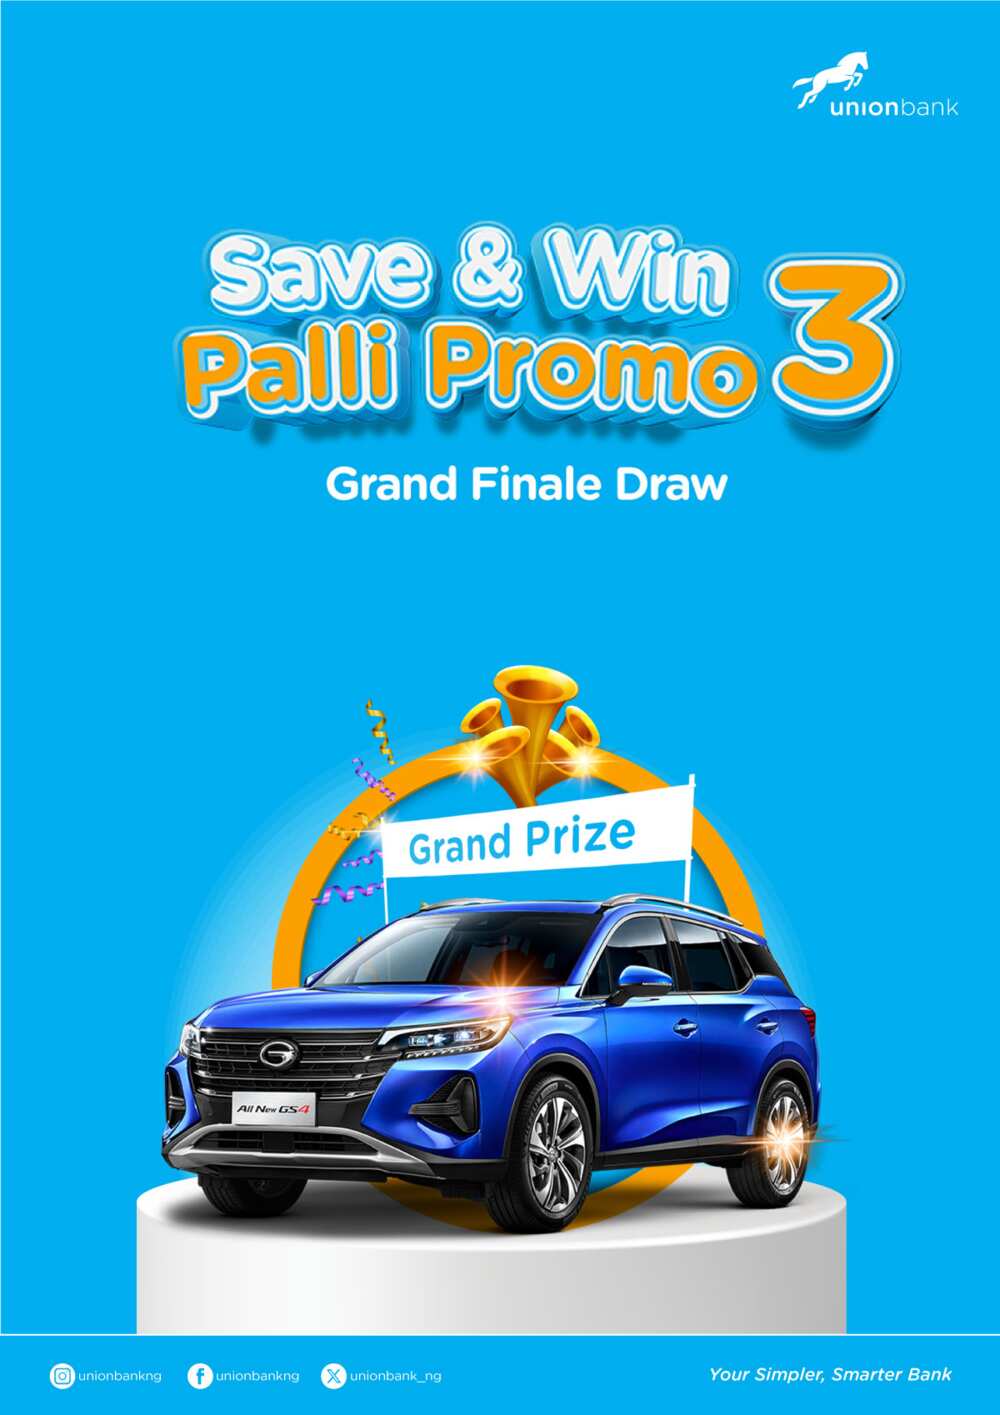 Union Bank Set to Gift Lucky Customers with GAC SUV, N15m at Save & Win Palli Promo 3.0 Finale Draw